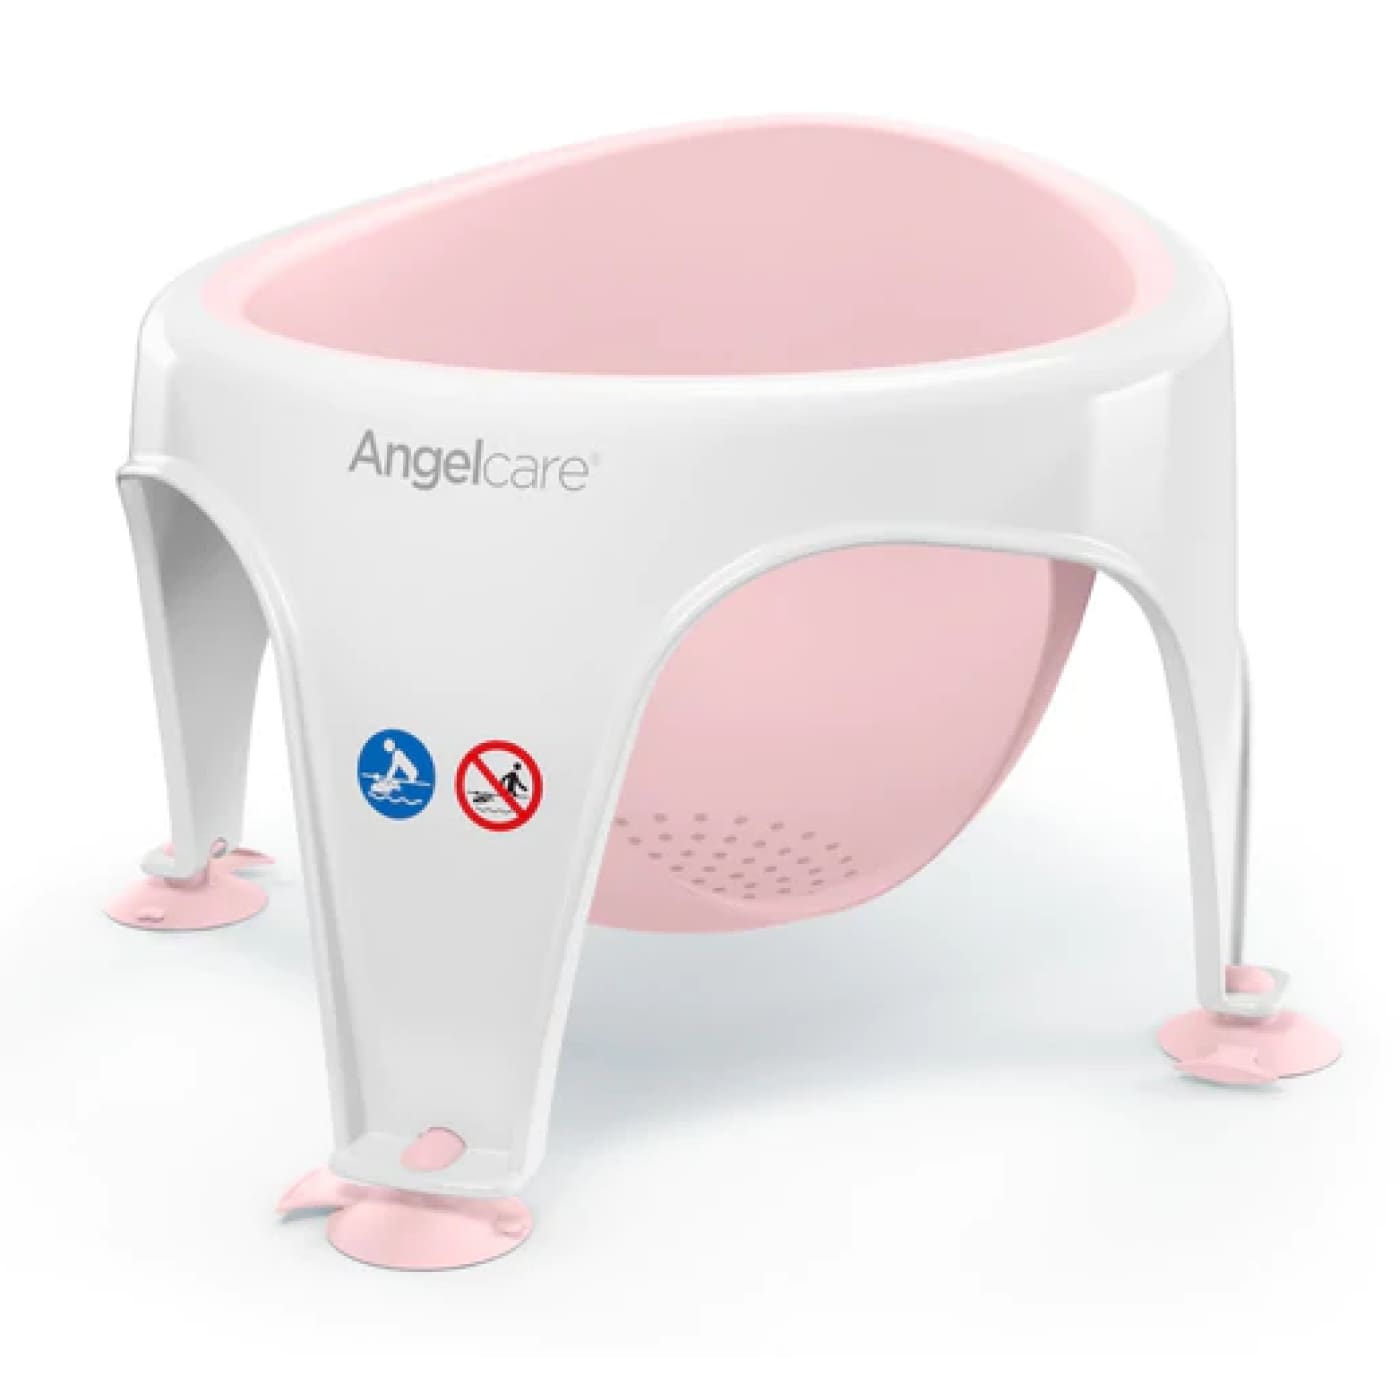 Angelcare Bath Seat Ring - Light Pink - Light Pink - BATHTIME & CHANGING - BATH SUPPORTS/SEATS